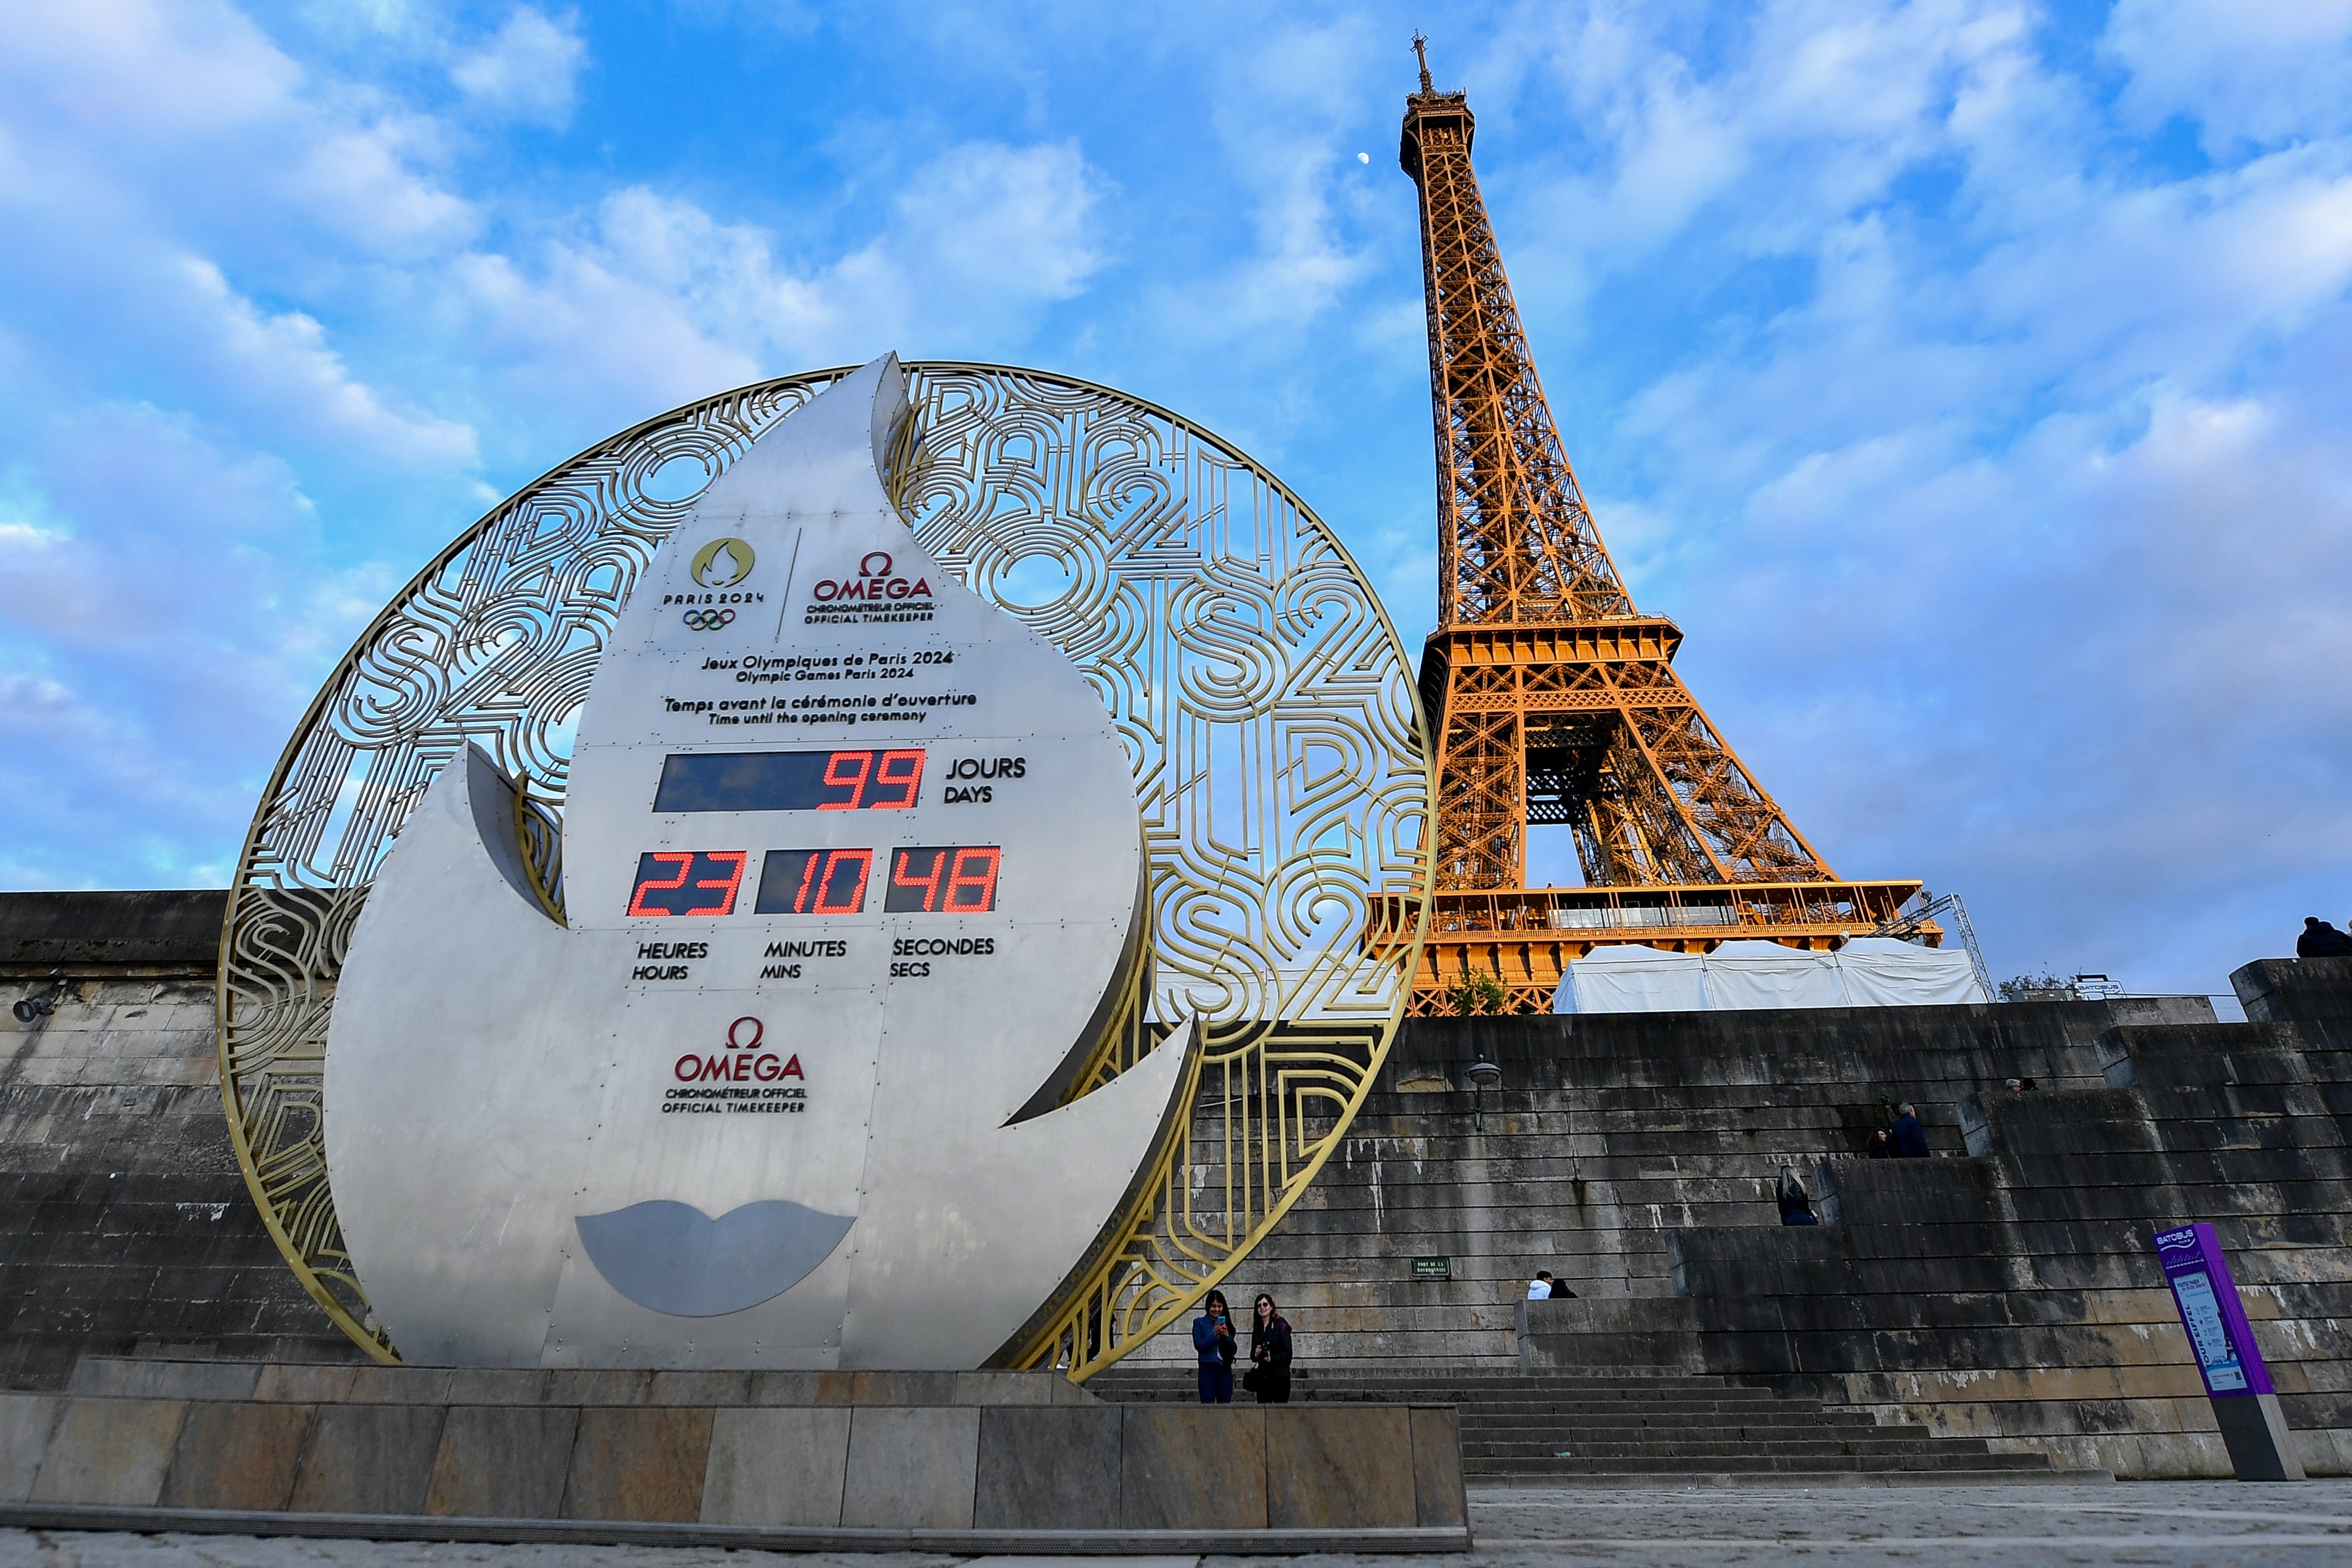 The Paris Olympic opening ceremony will be a spectacle